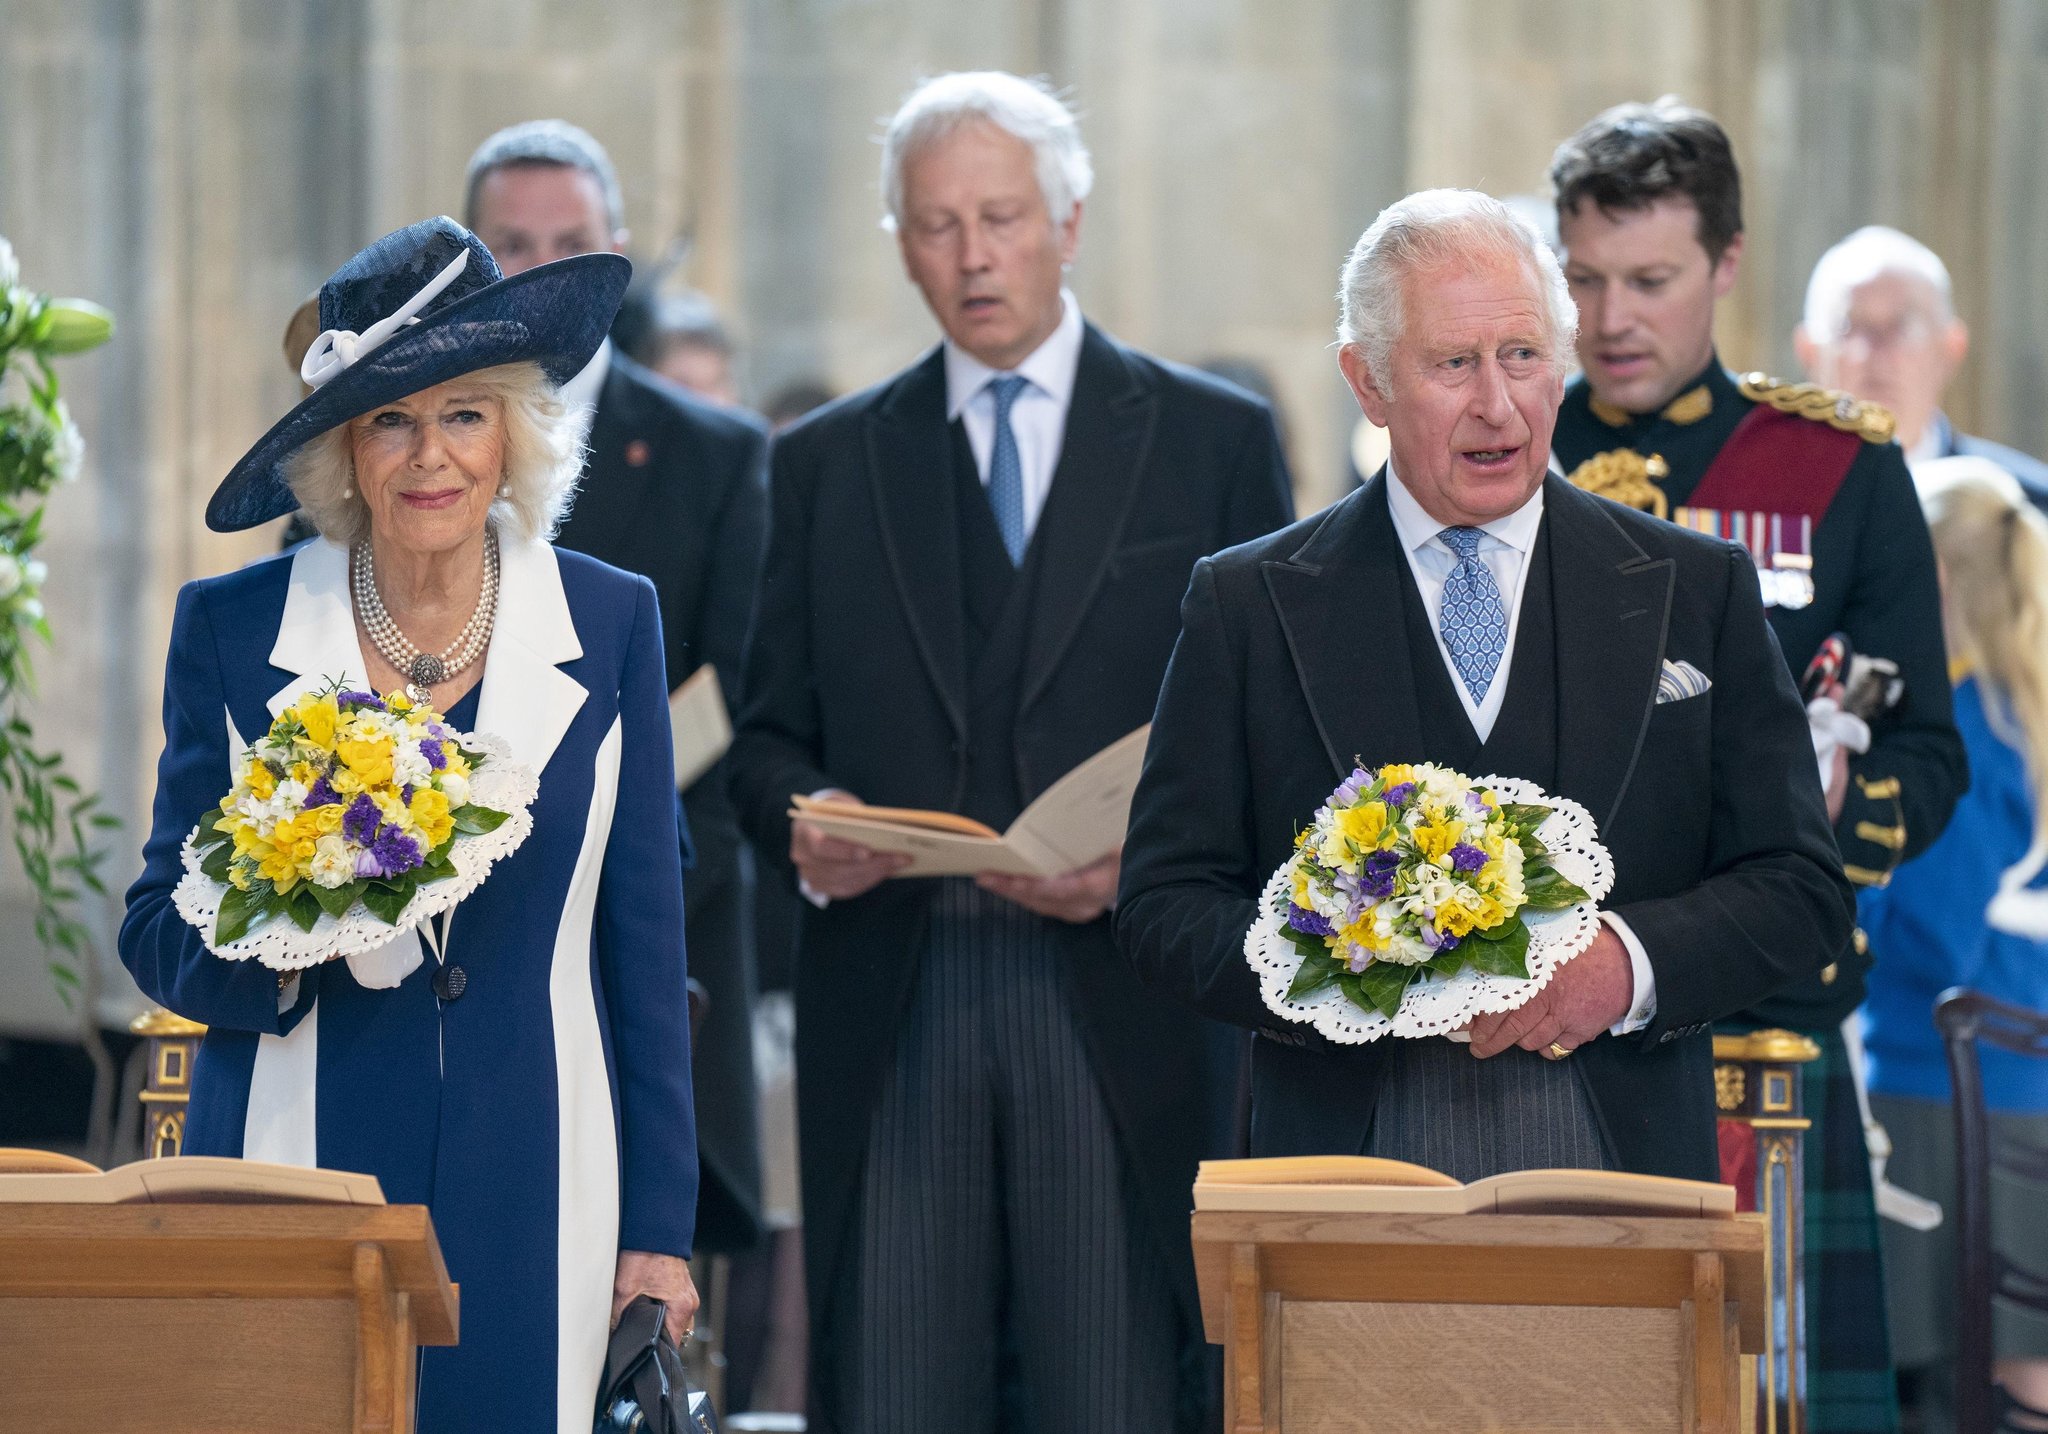 Charles gives out Maundy money at St George's Chapel in absence of Queen